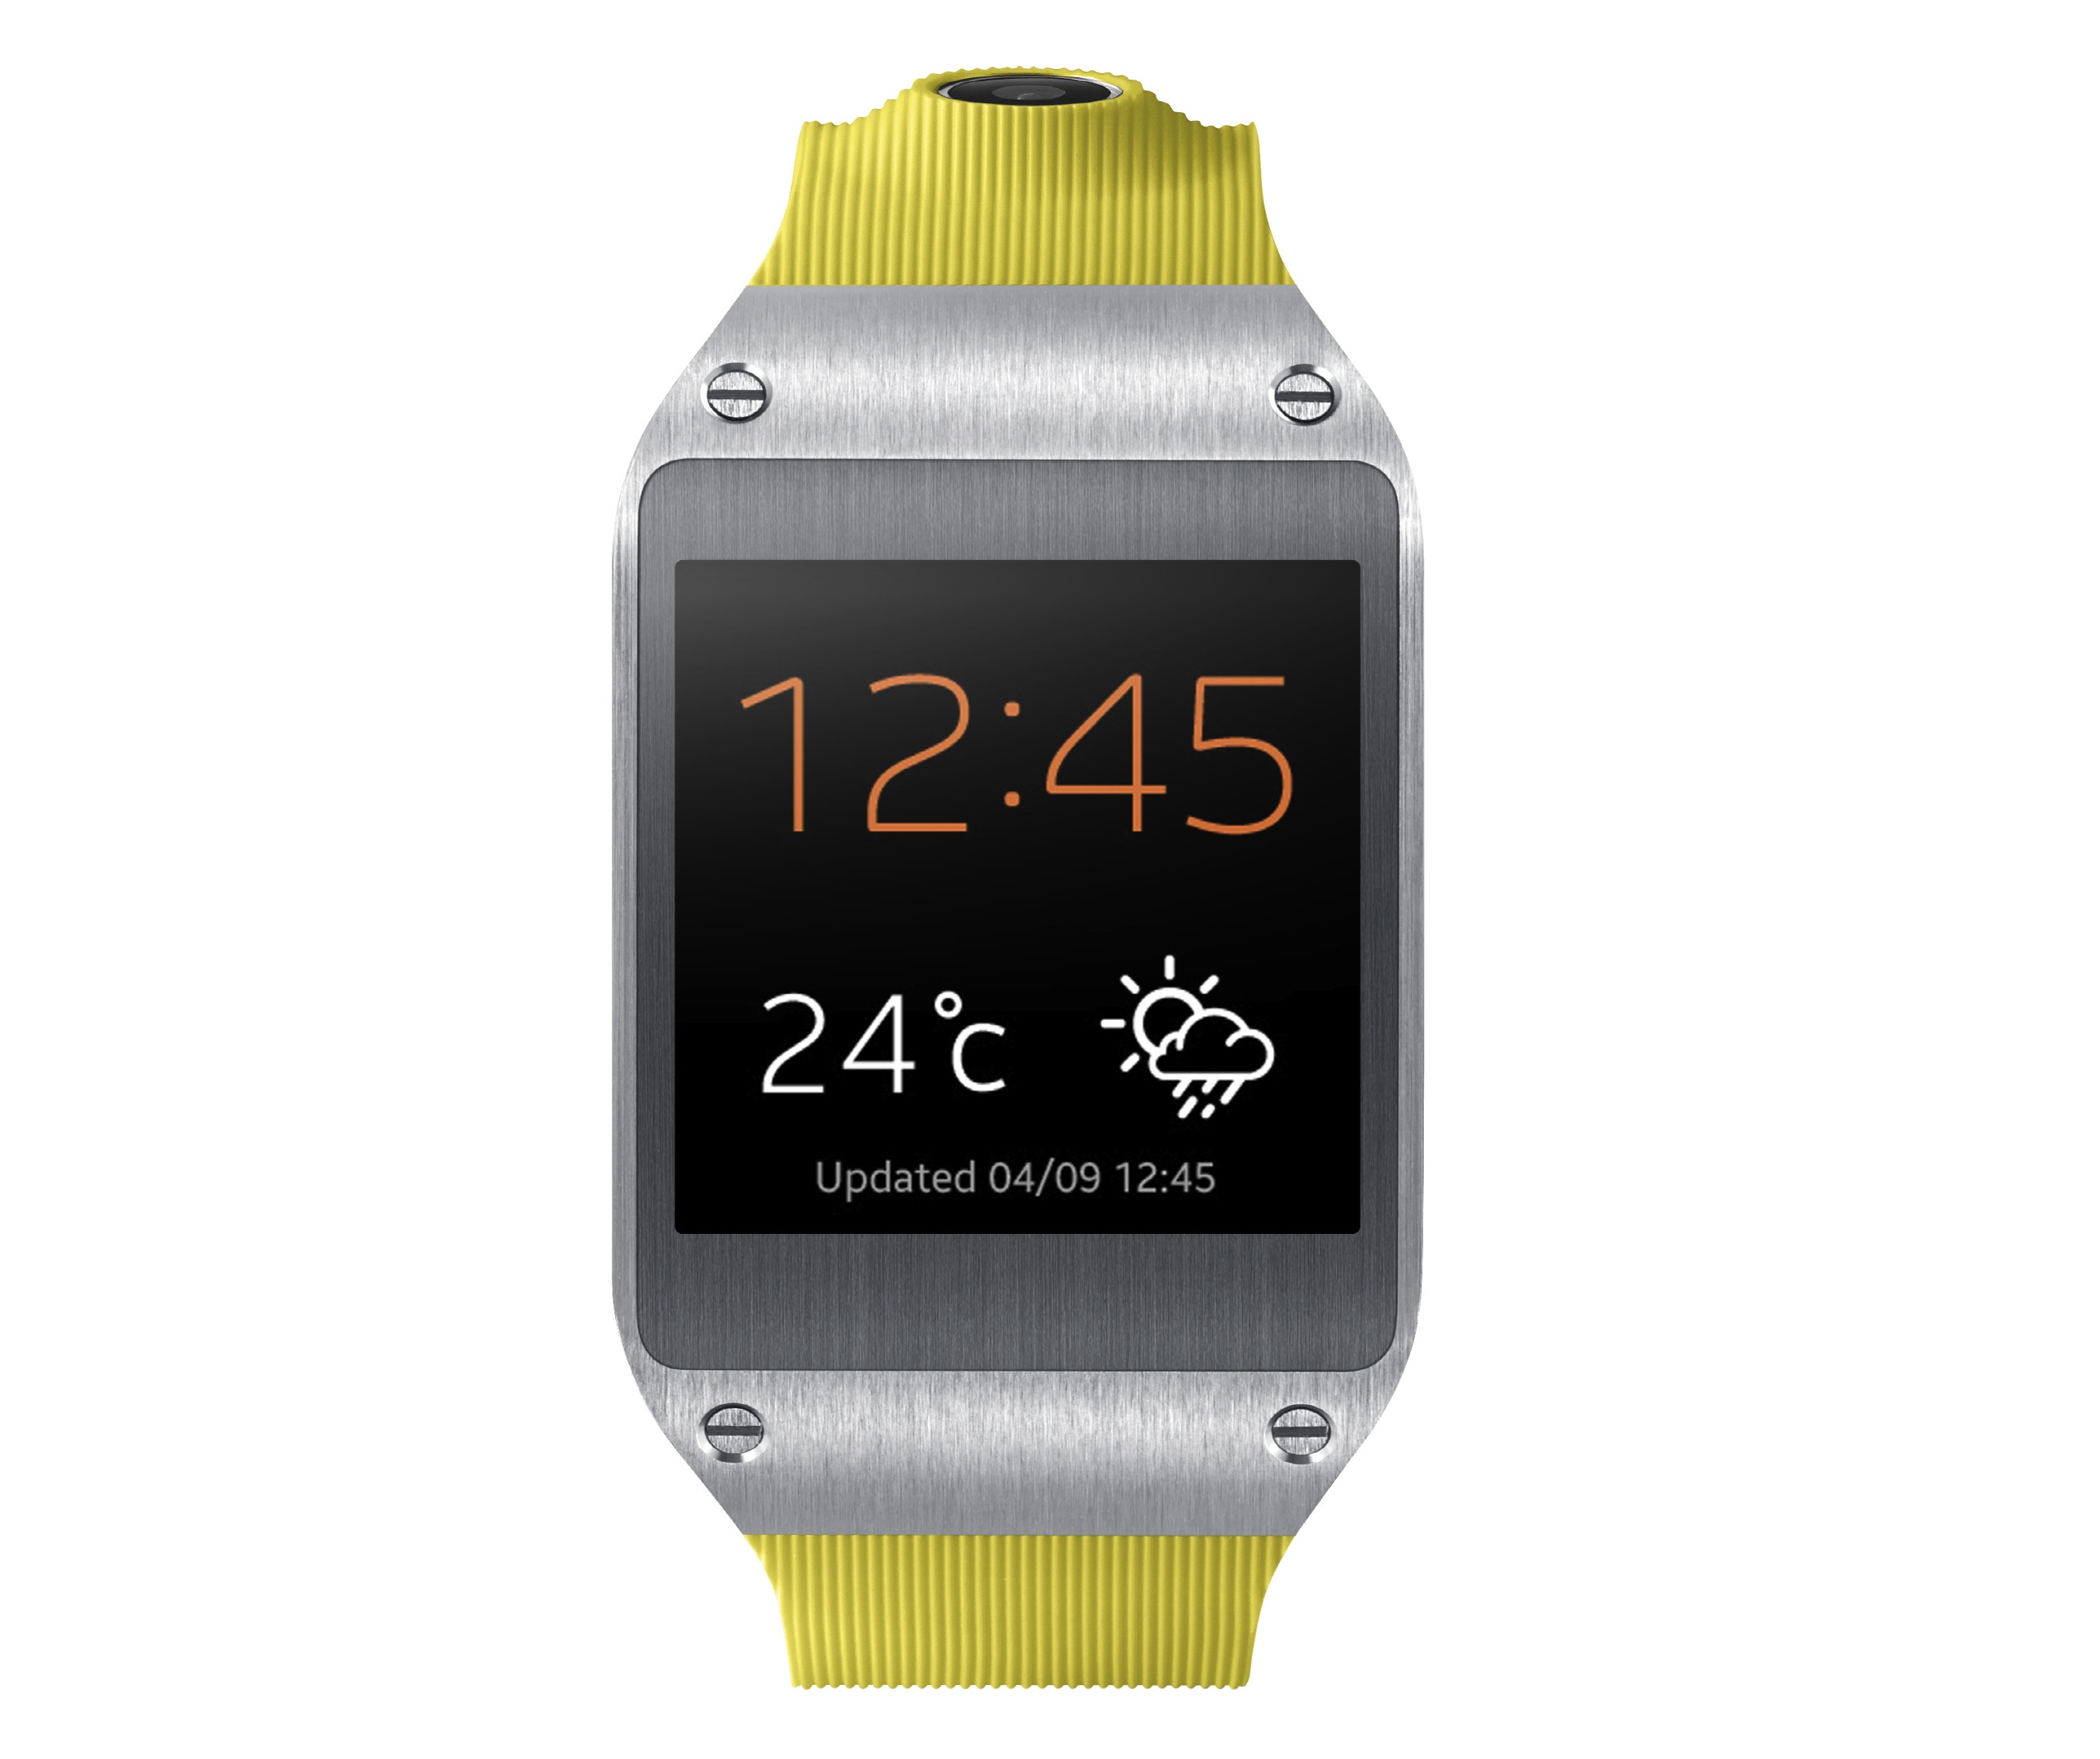 Samsung fires first shot in the smartwatch wars, announces the Galaxy